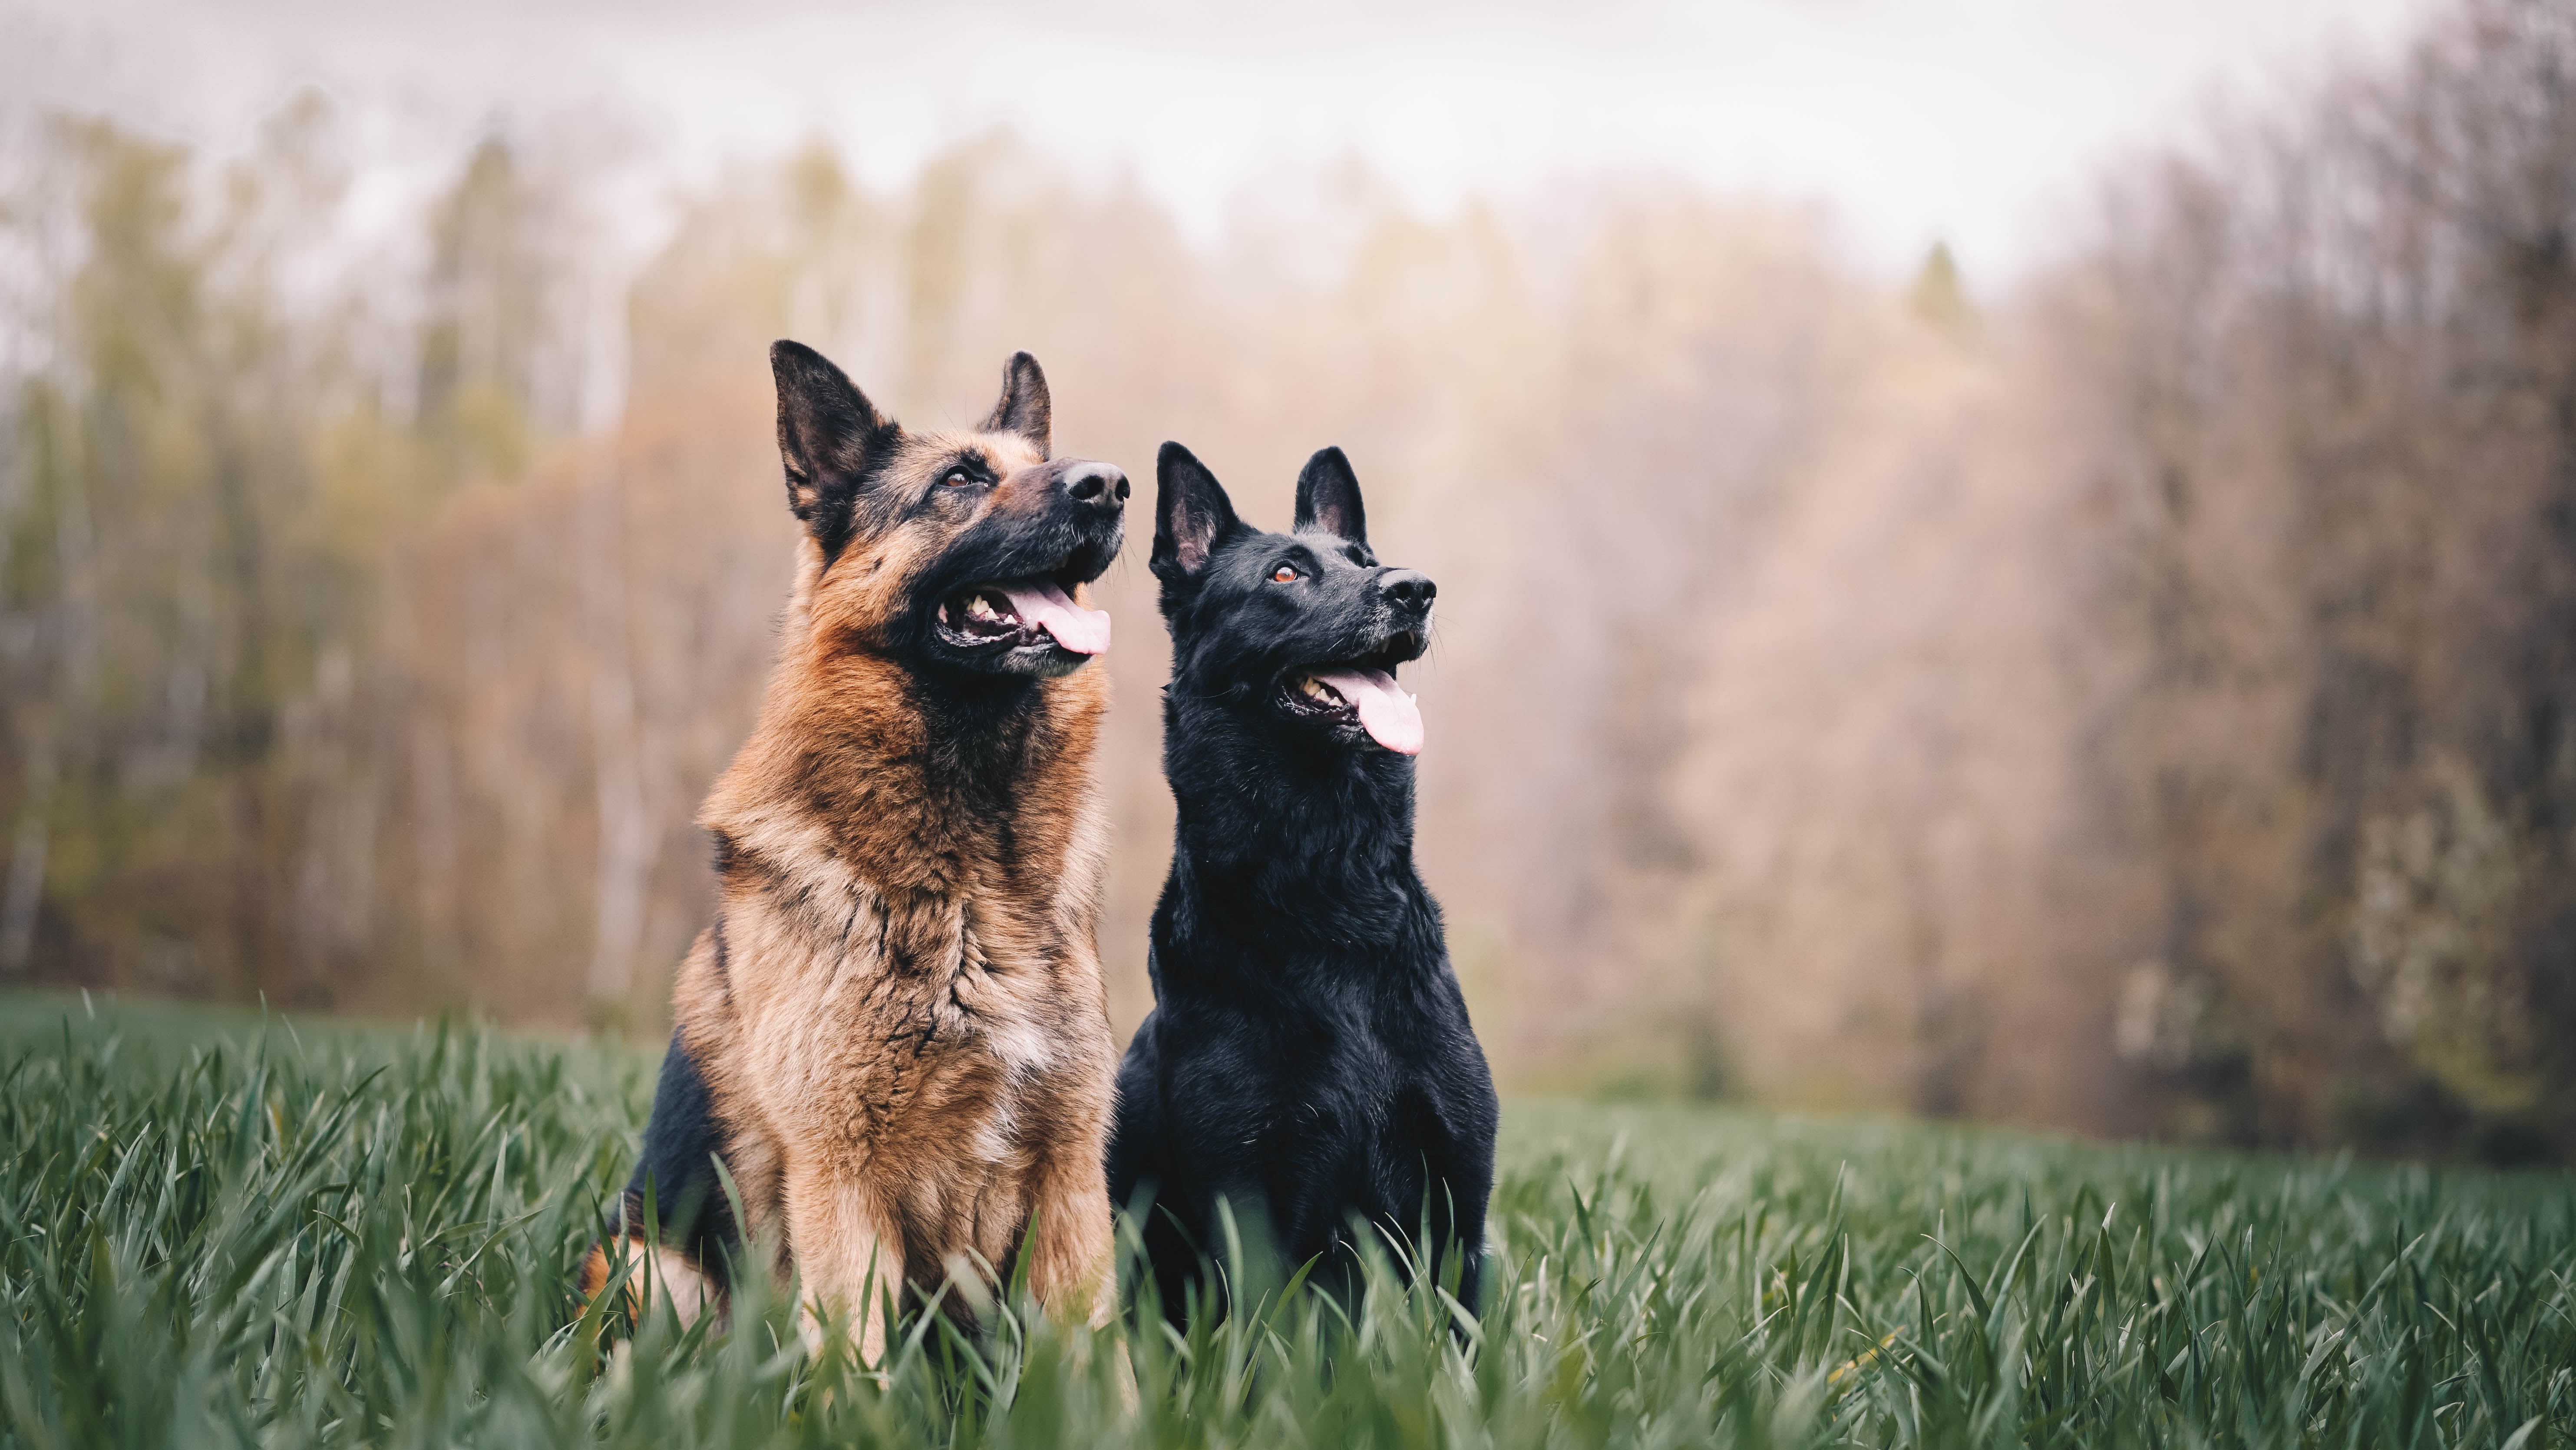 Two German shepherds are profiled sitting in the grass of a sunlit field with a surrounding wood and looking at the same unseen point off-camera.